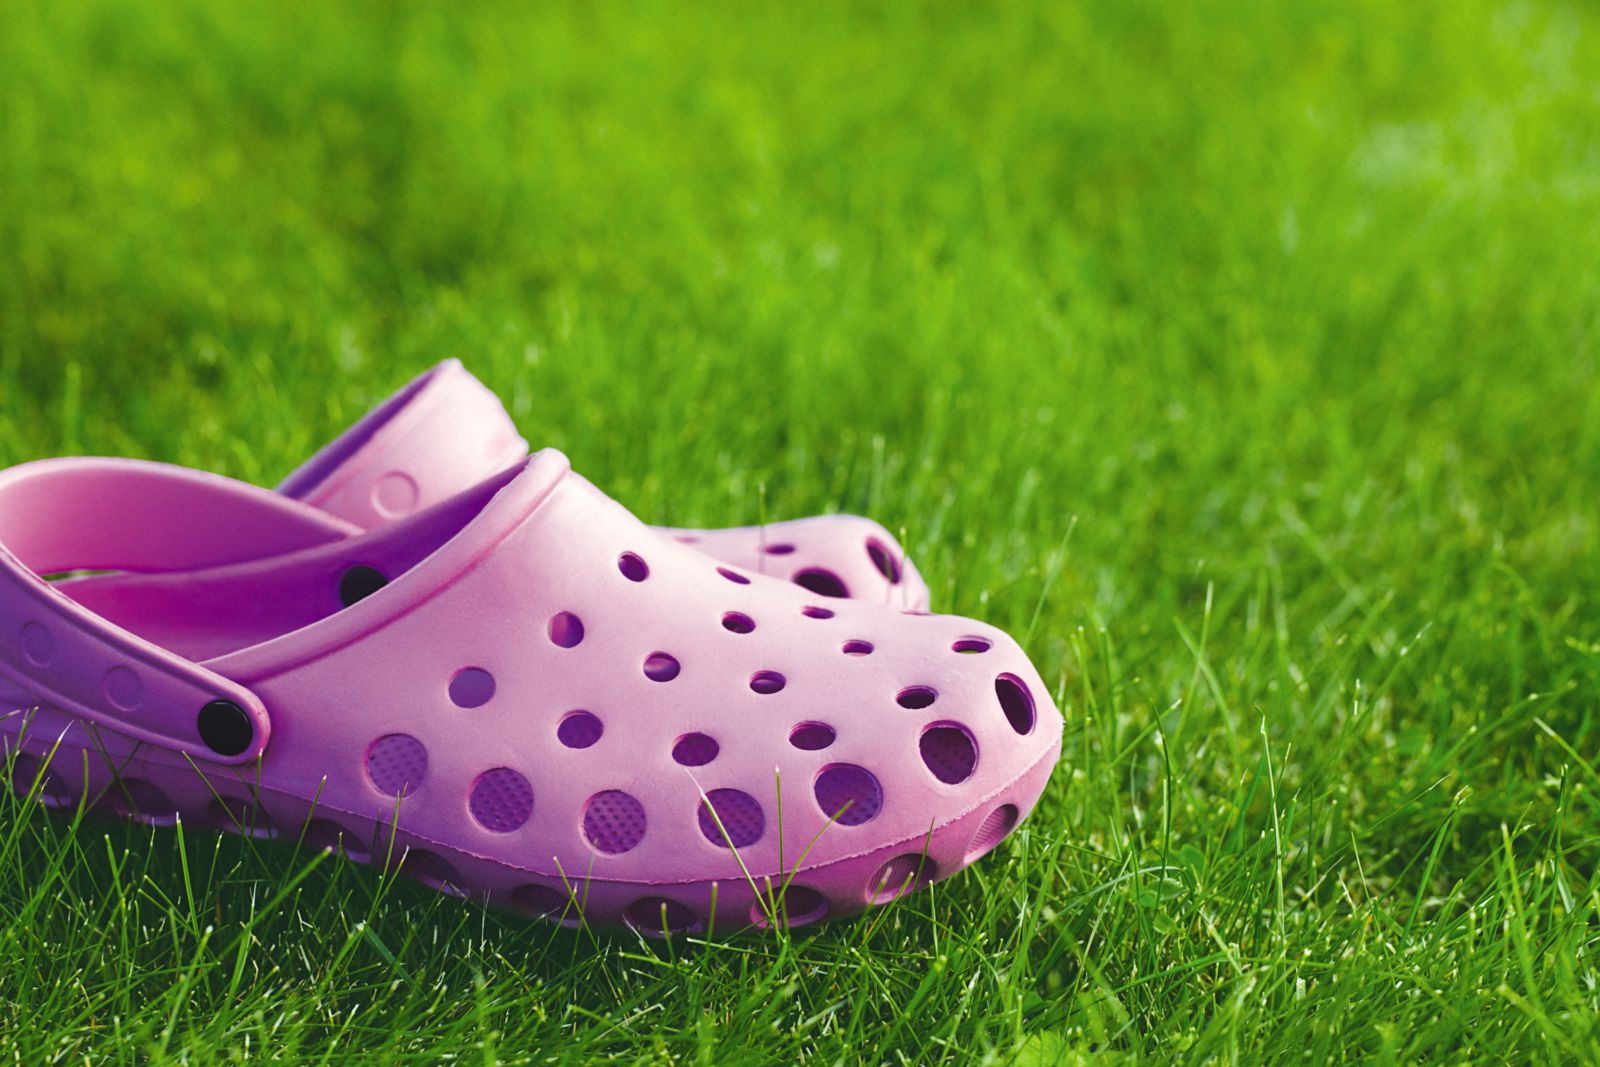 High-Heeled Crocs Are a Thing You Can Now Buy